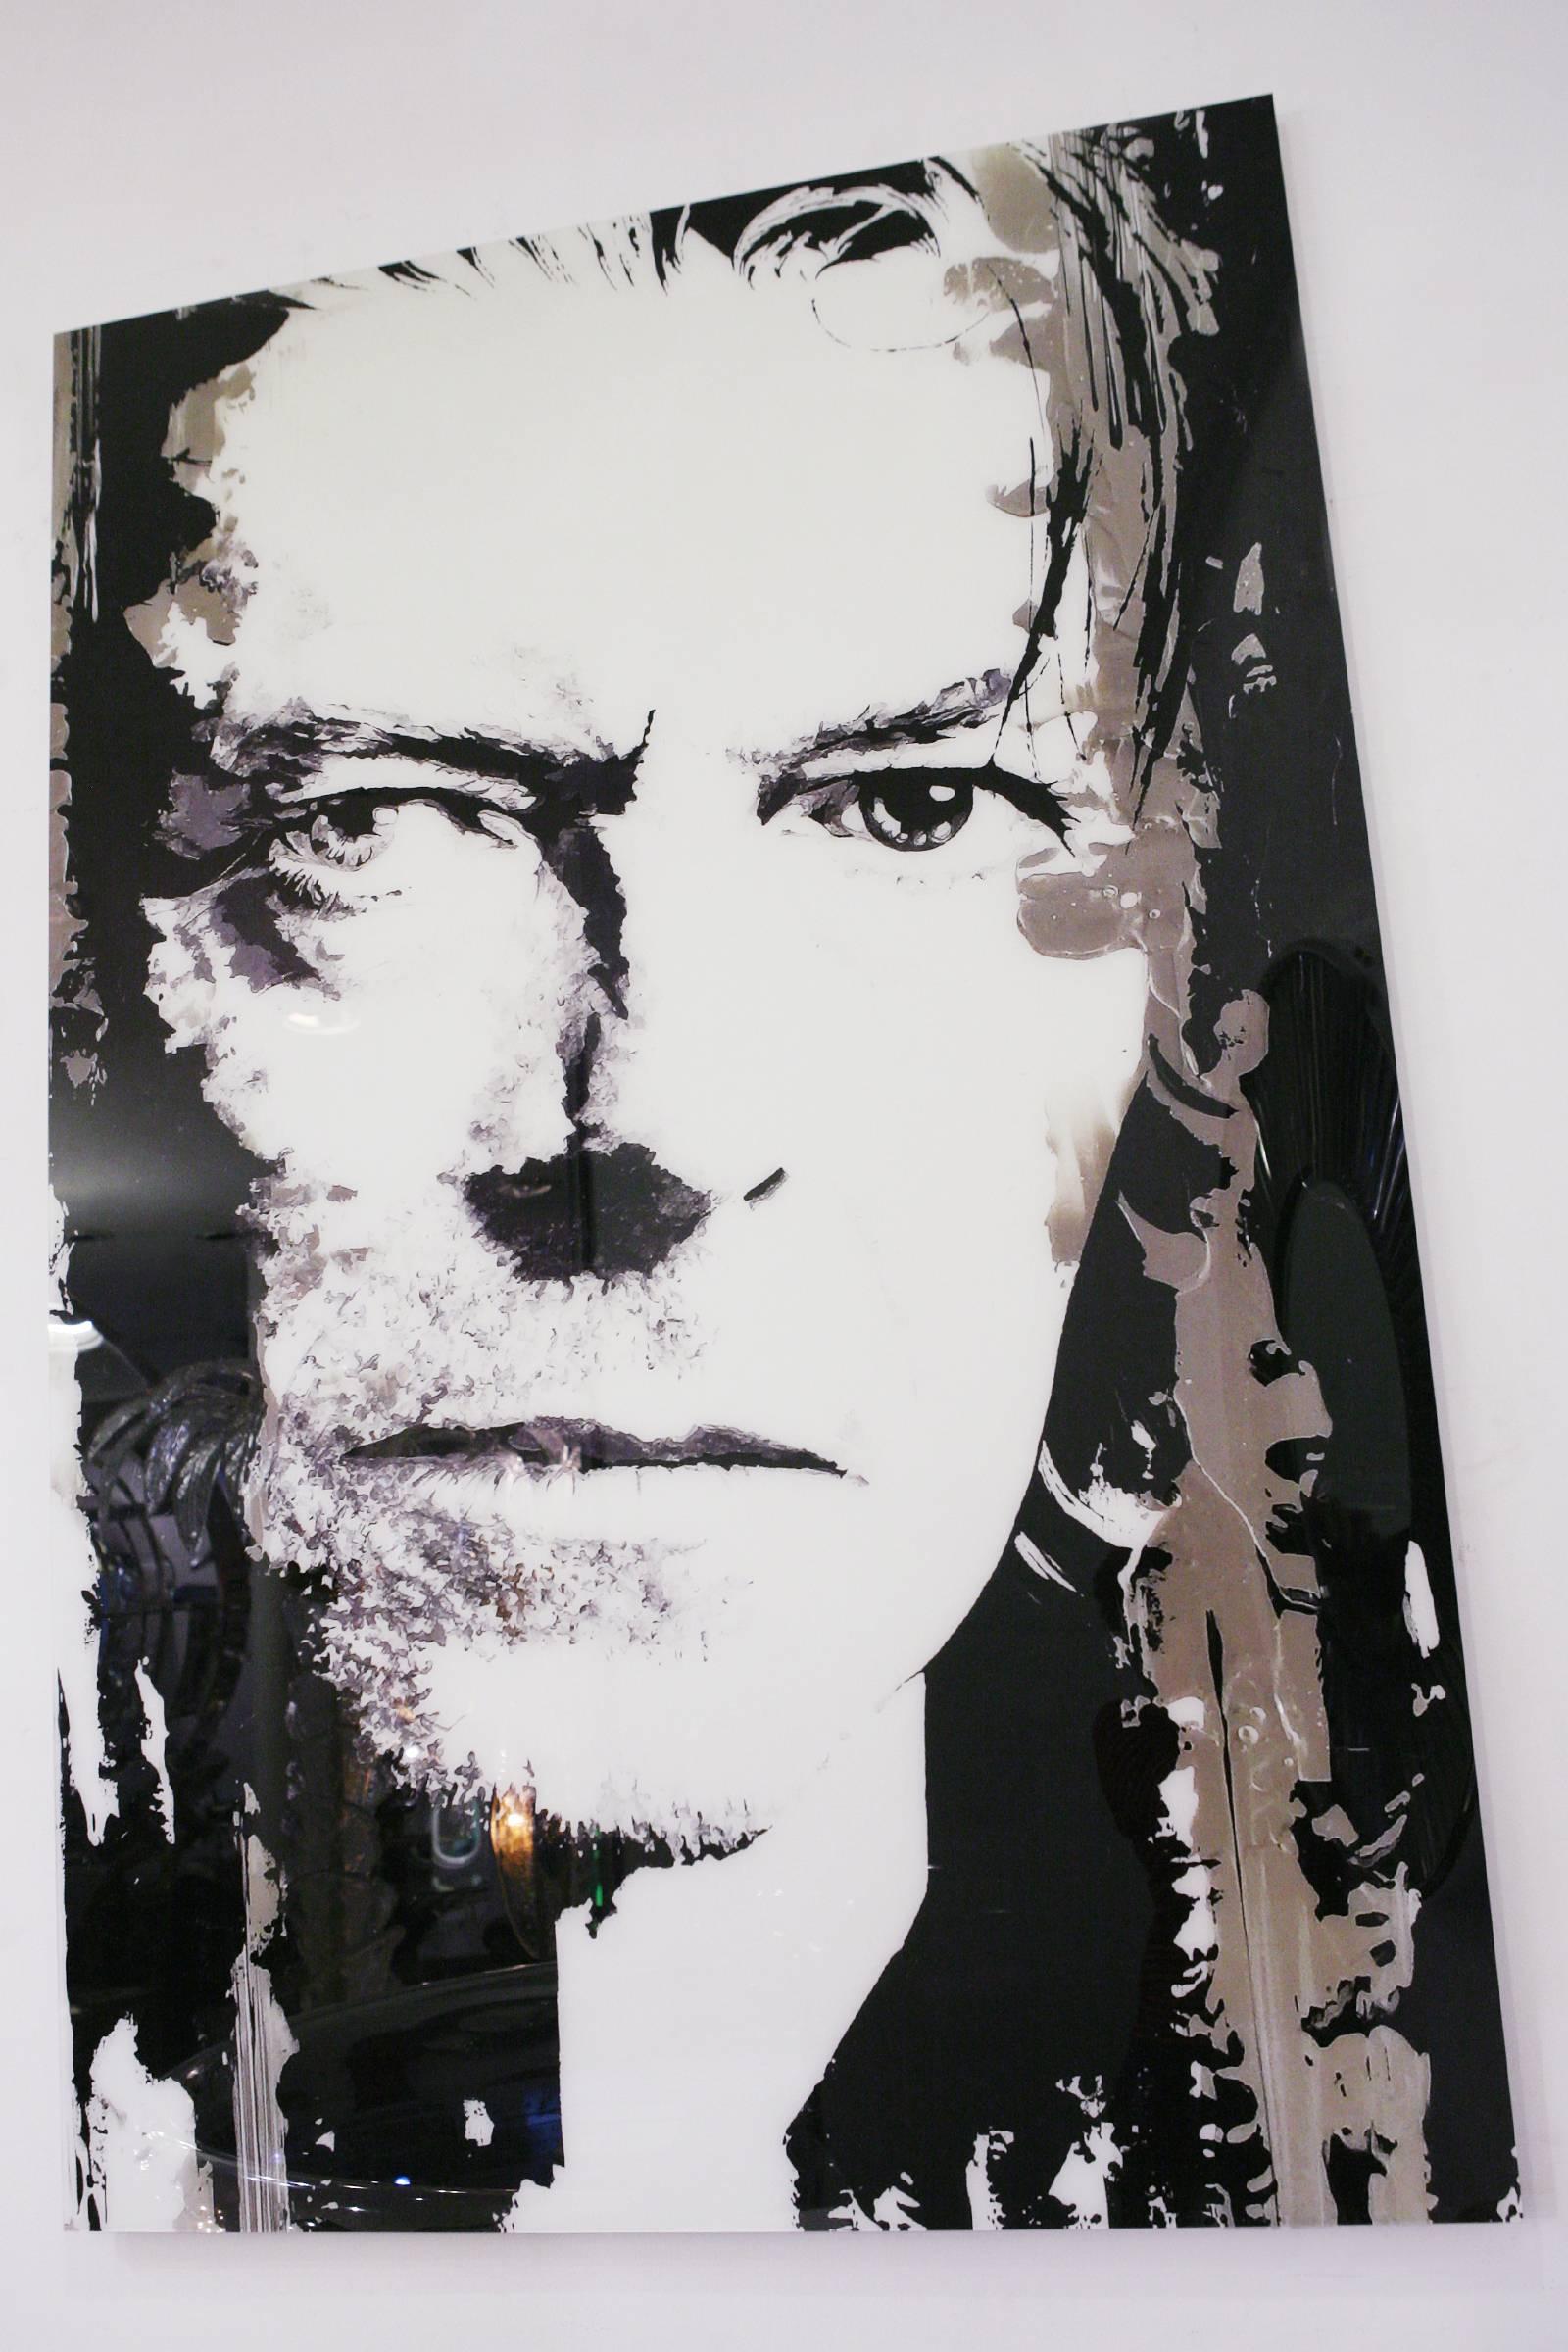 Photography David Bowie on plexiglass.
Limited Edition of six pieces. Made by Valerie 
Durand artist. Delivered with certificate.
